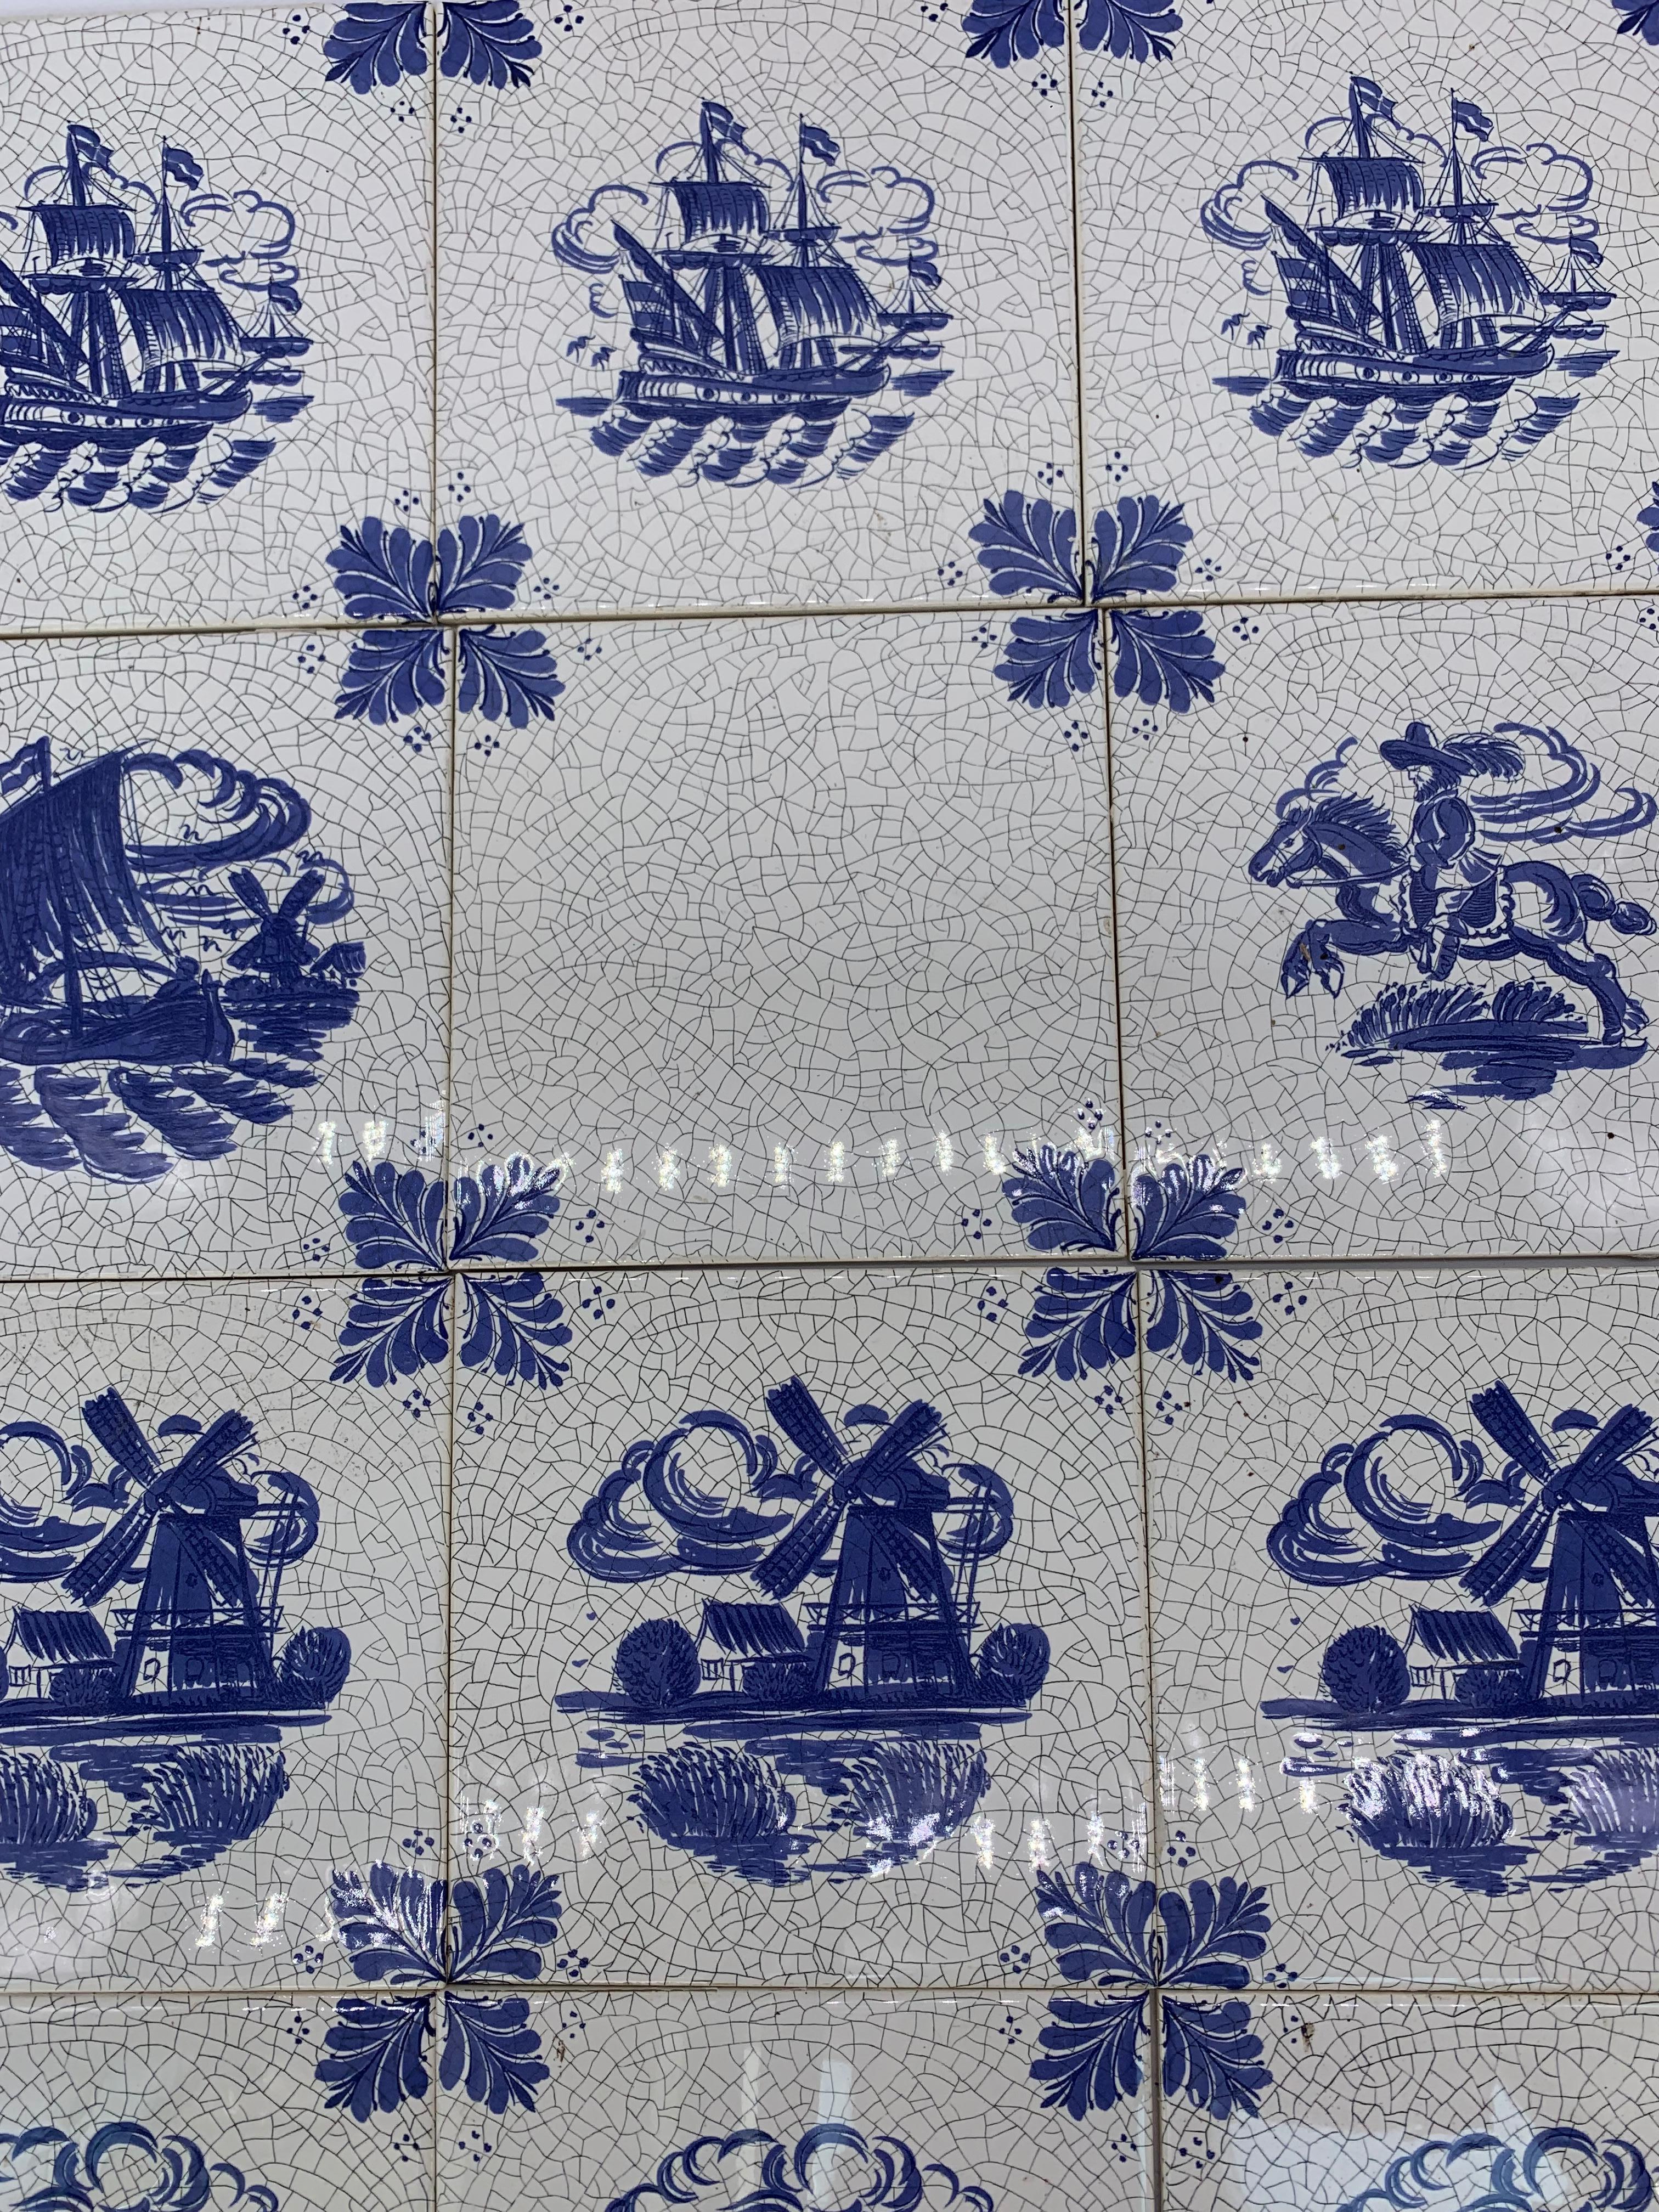 White and blue tiles 20th century with different images.
Flowers, ships and riders on white background.
30 tiles just white with blue corners and 20 various tiles.

Measure: Each tile 15 x 15 cm
Servais Germany (manufacturer).